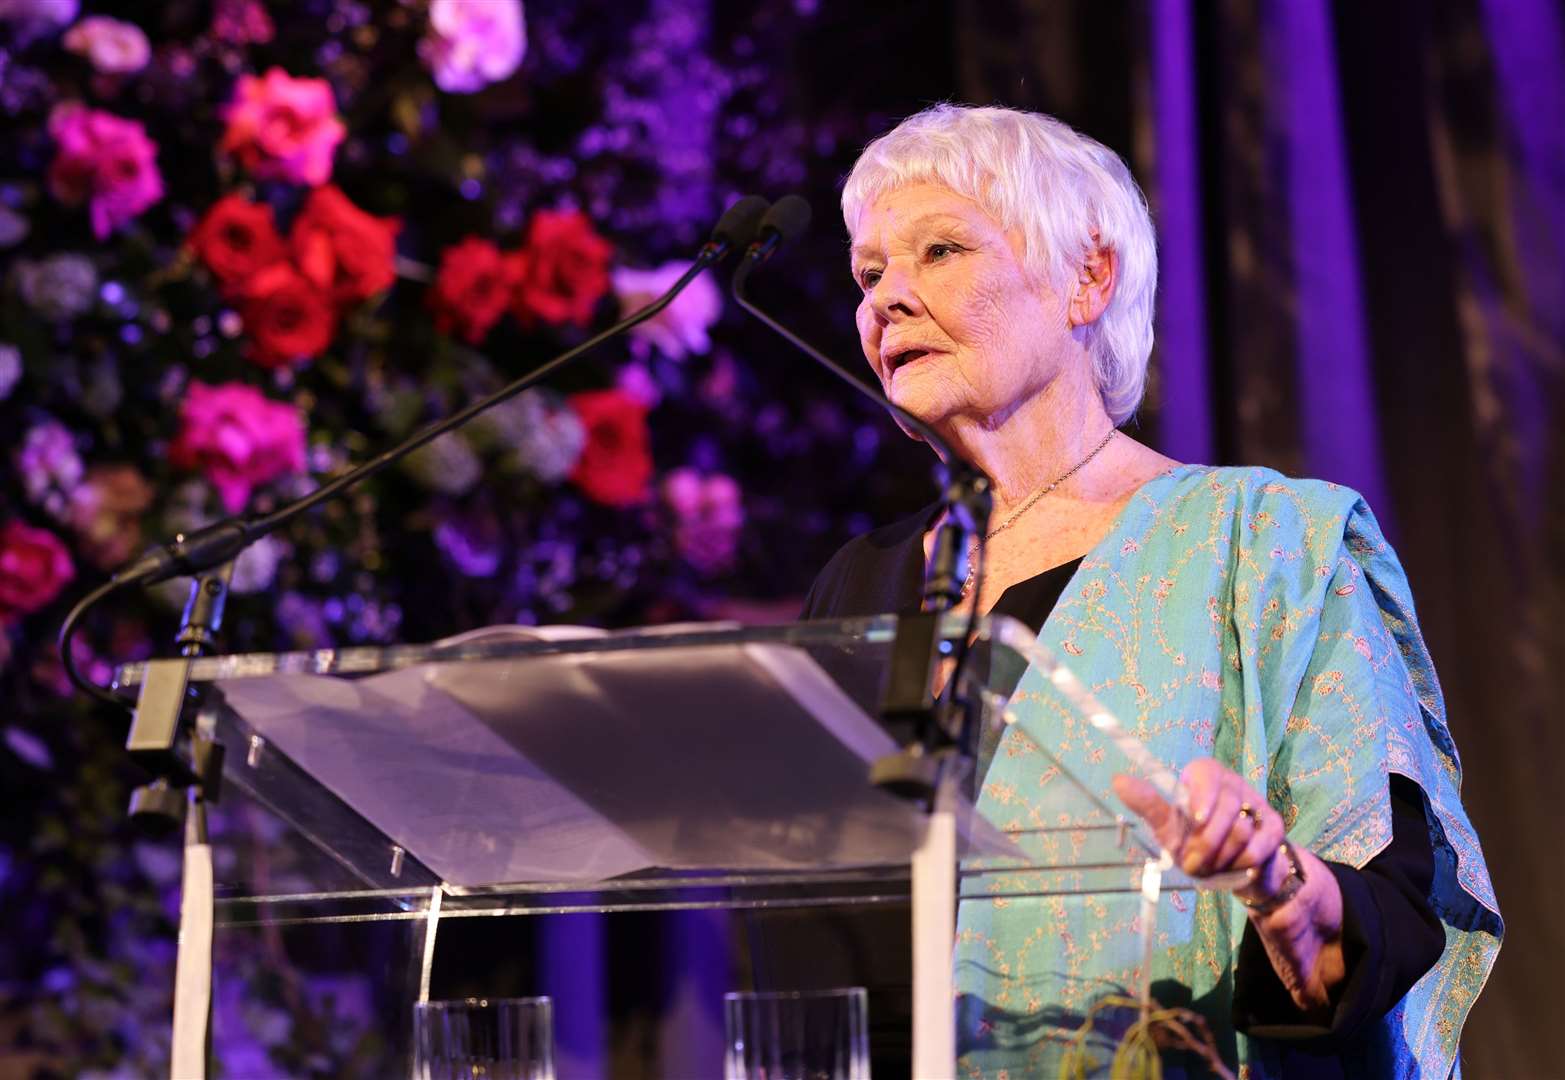 Dame Judi Dench performs on stage at a Celebration of Shakespeare event (Chris Jackson/PA)